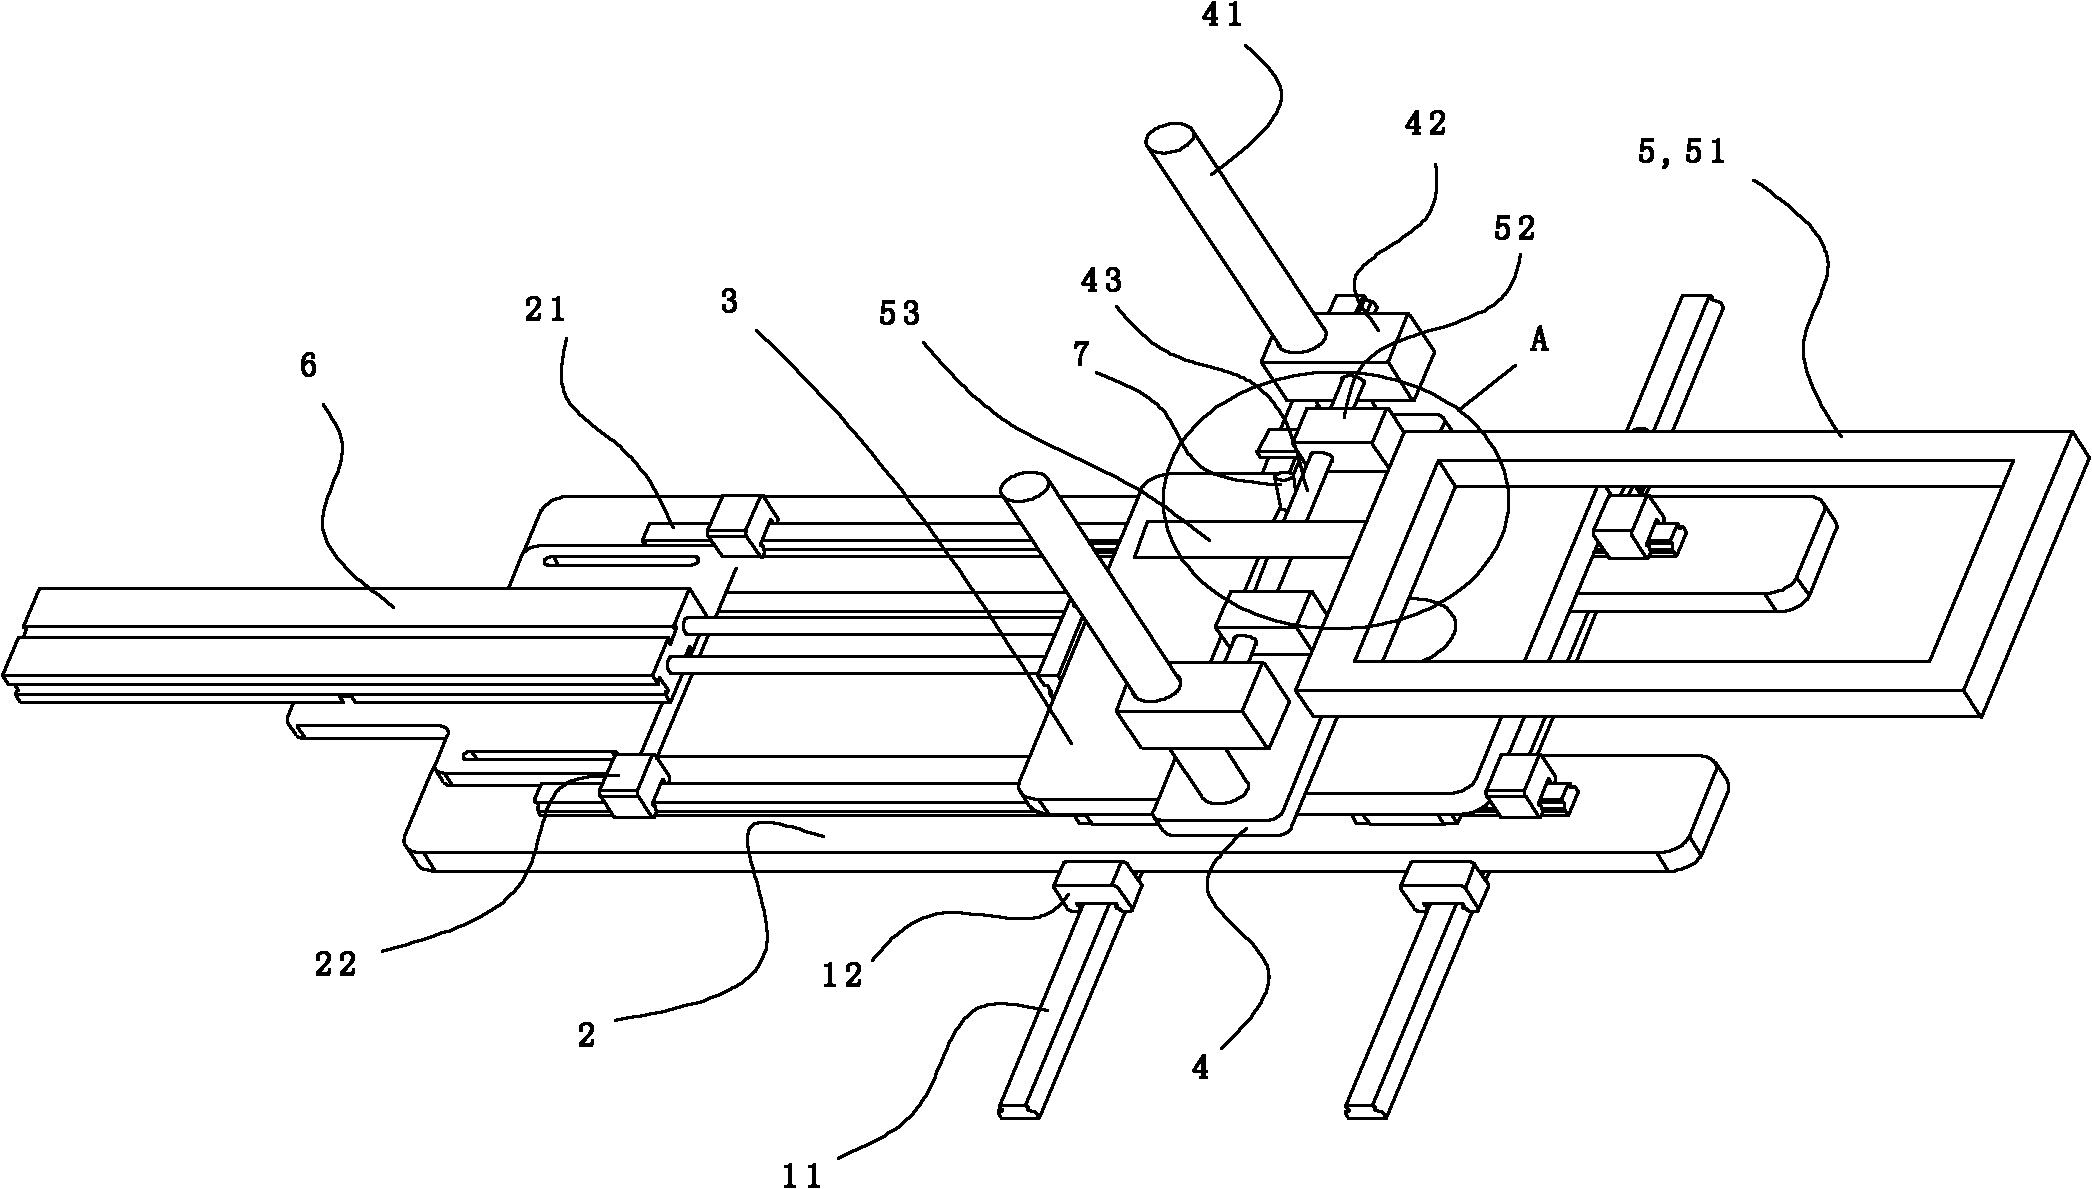 Screen printing device for television panel